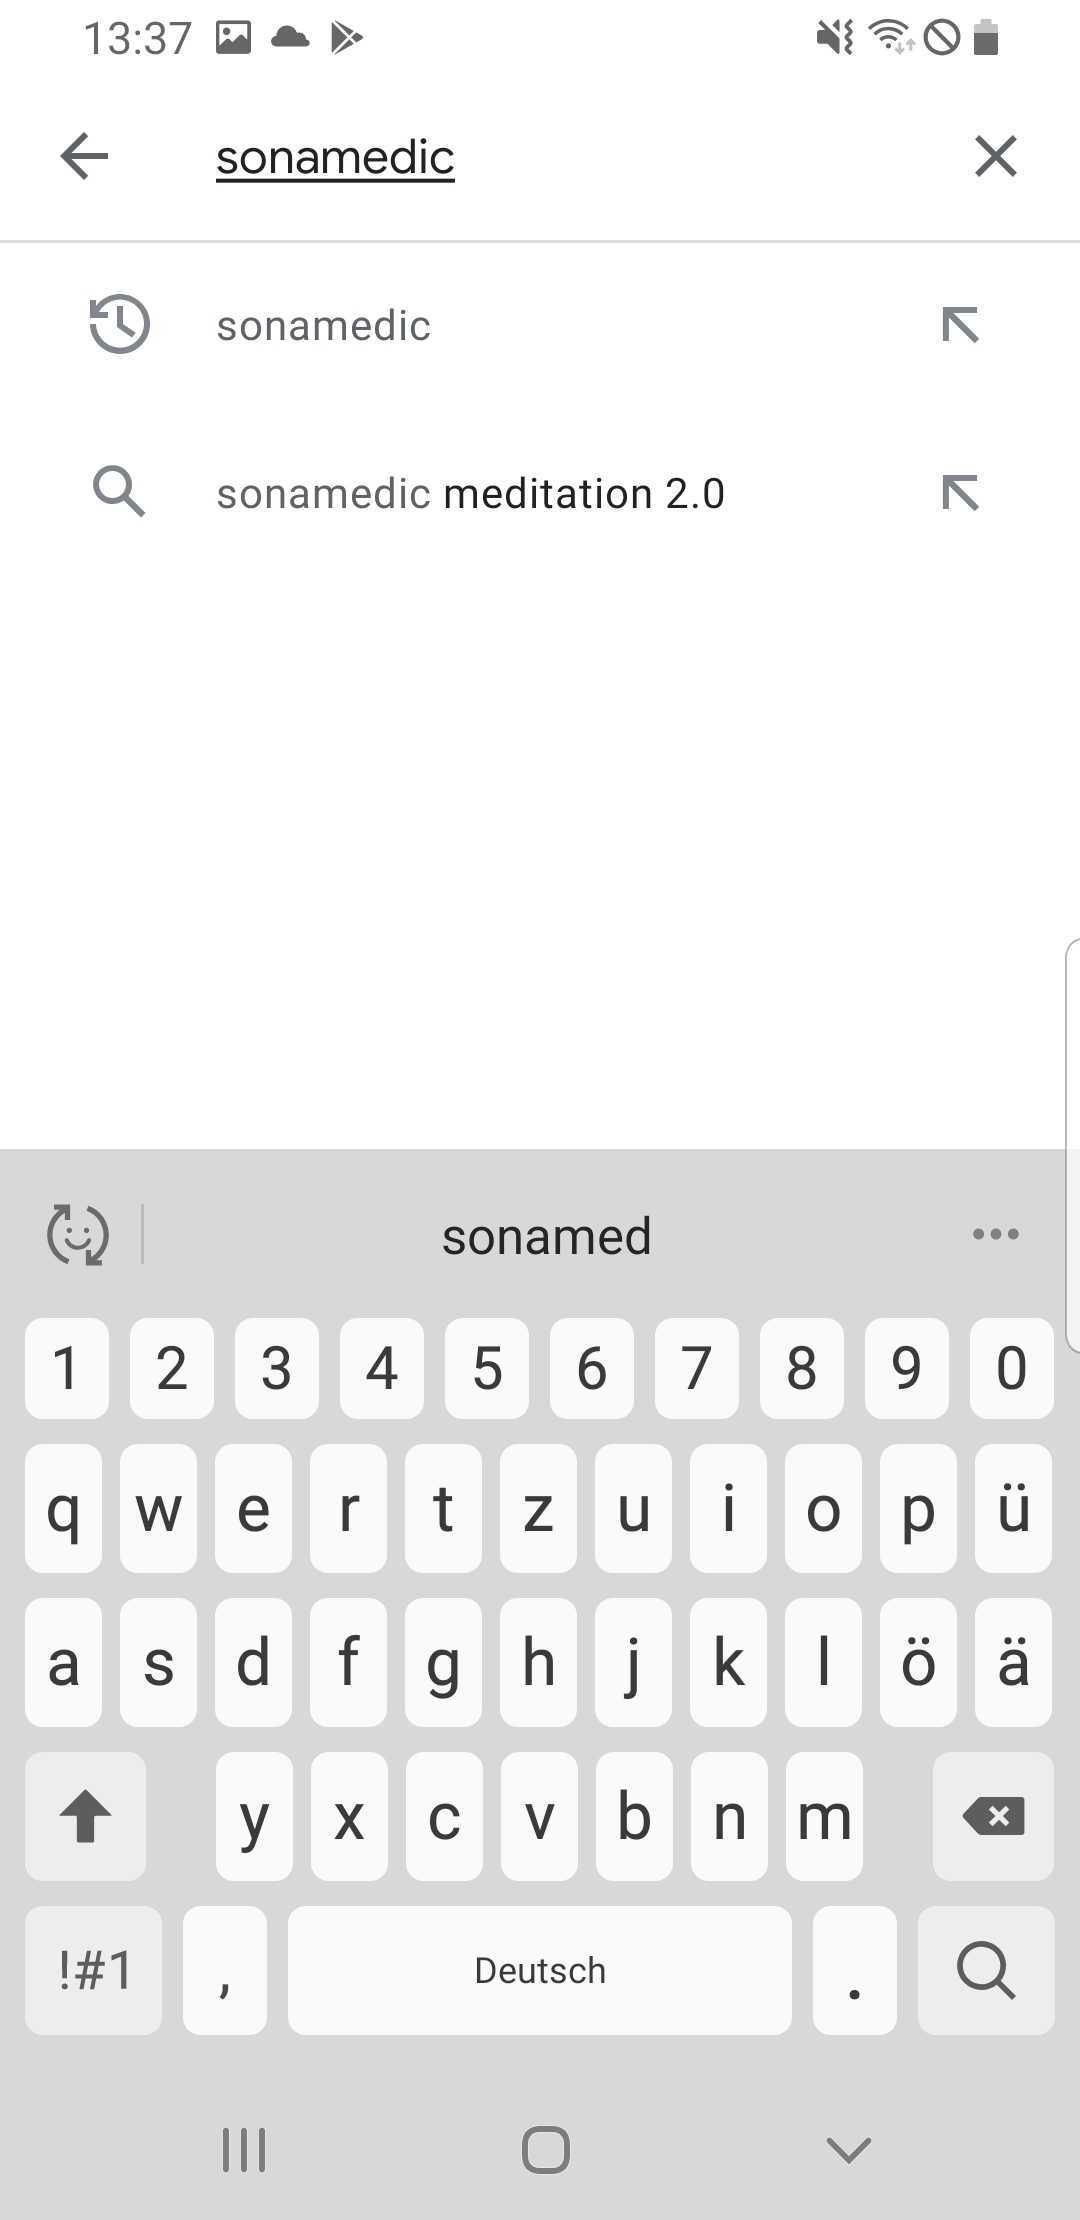 FAQ - frequently asked questions: Search sonamedic in Google Play